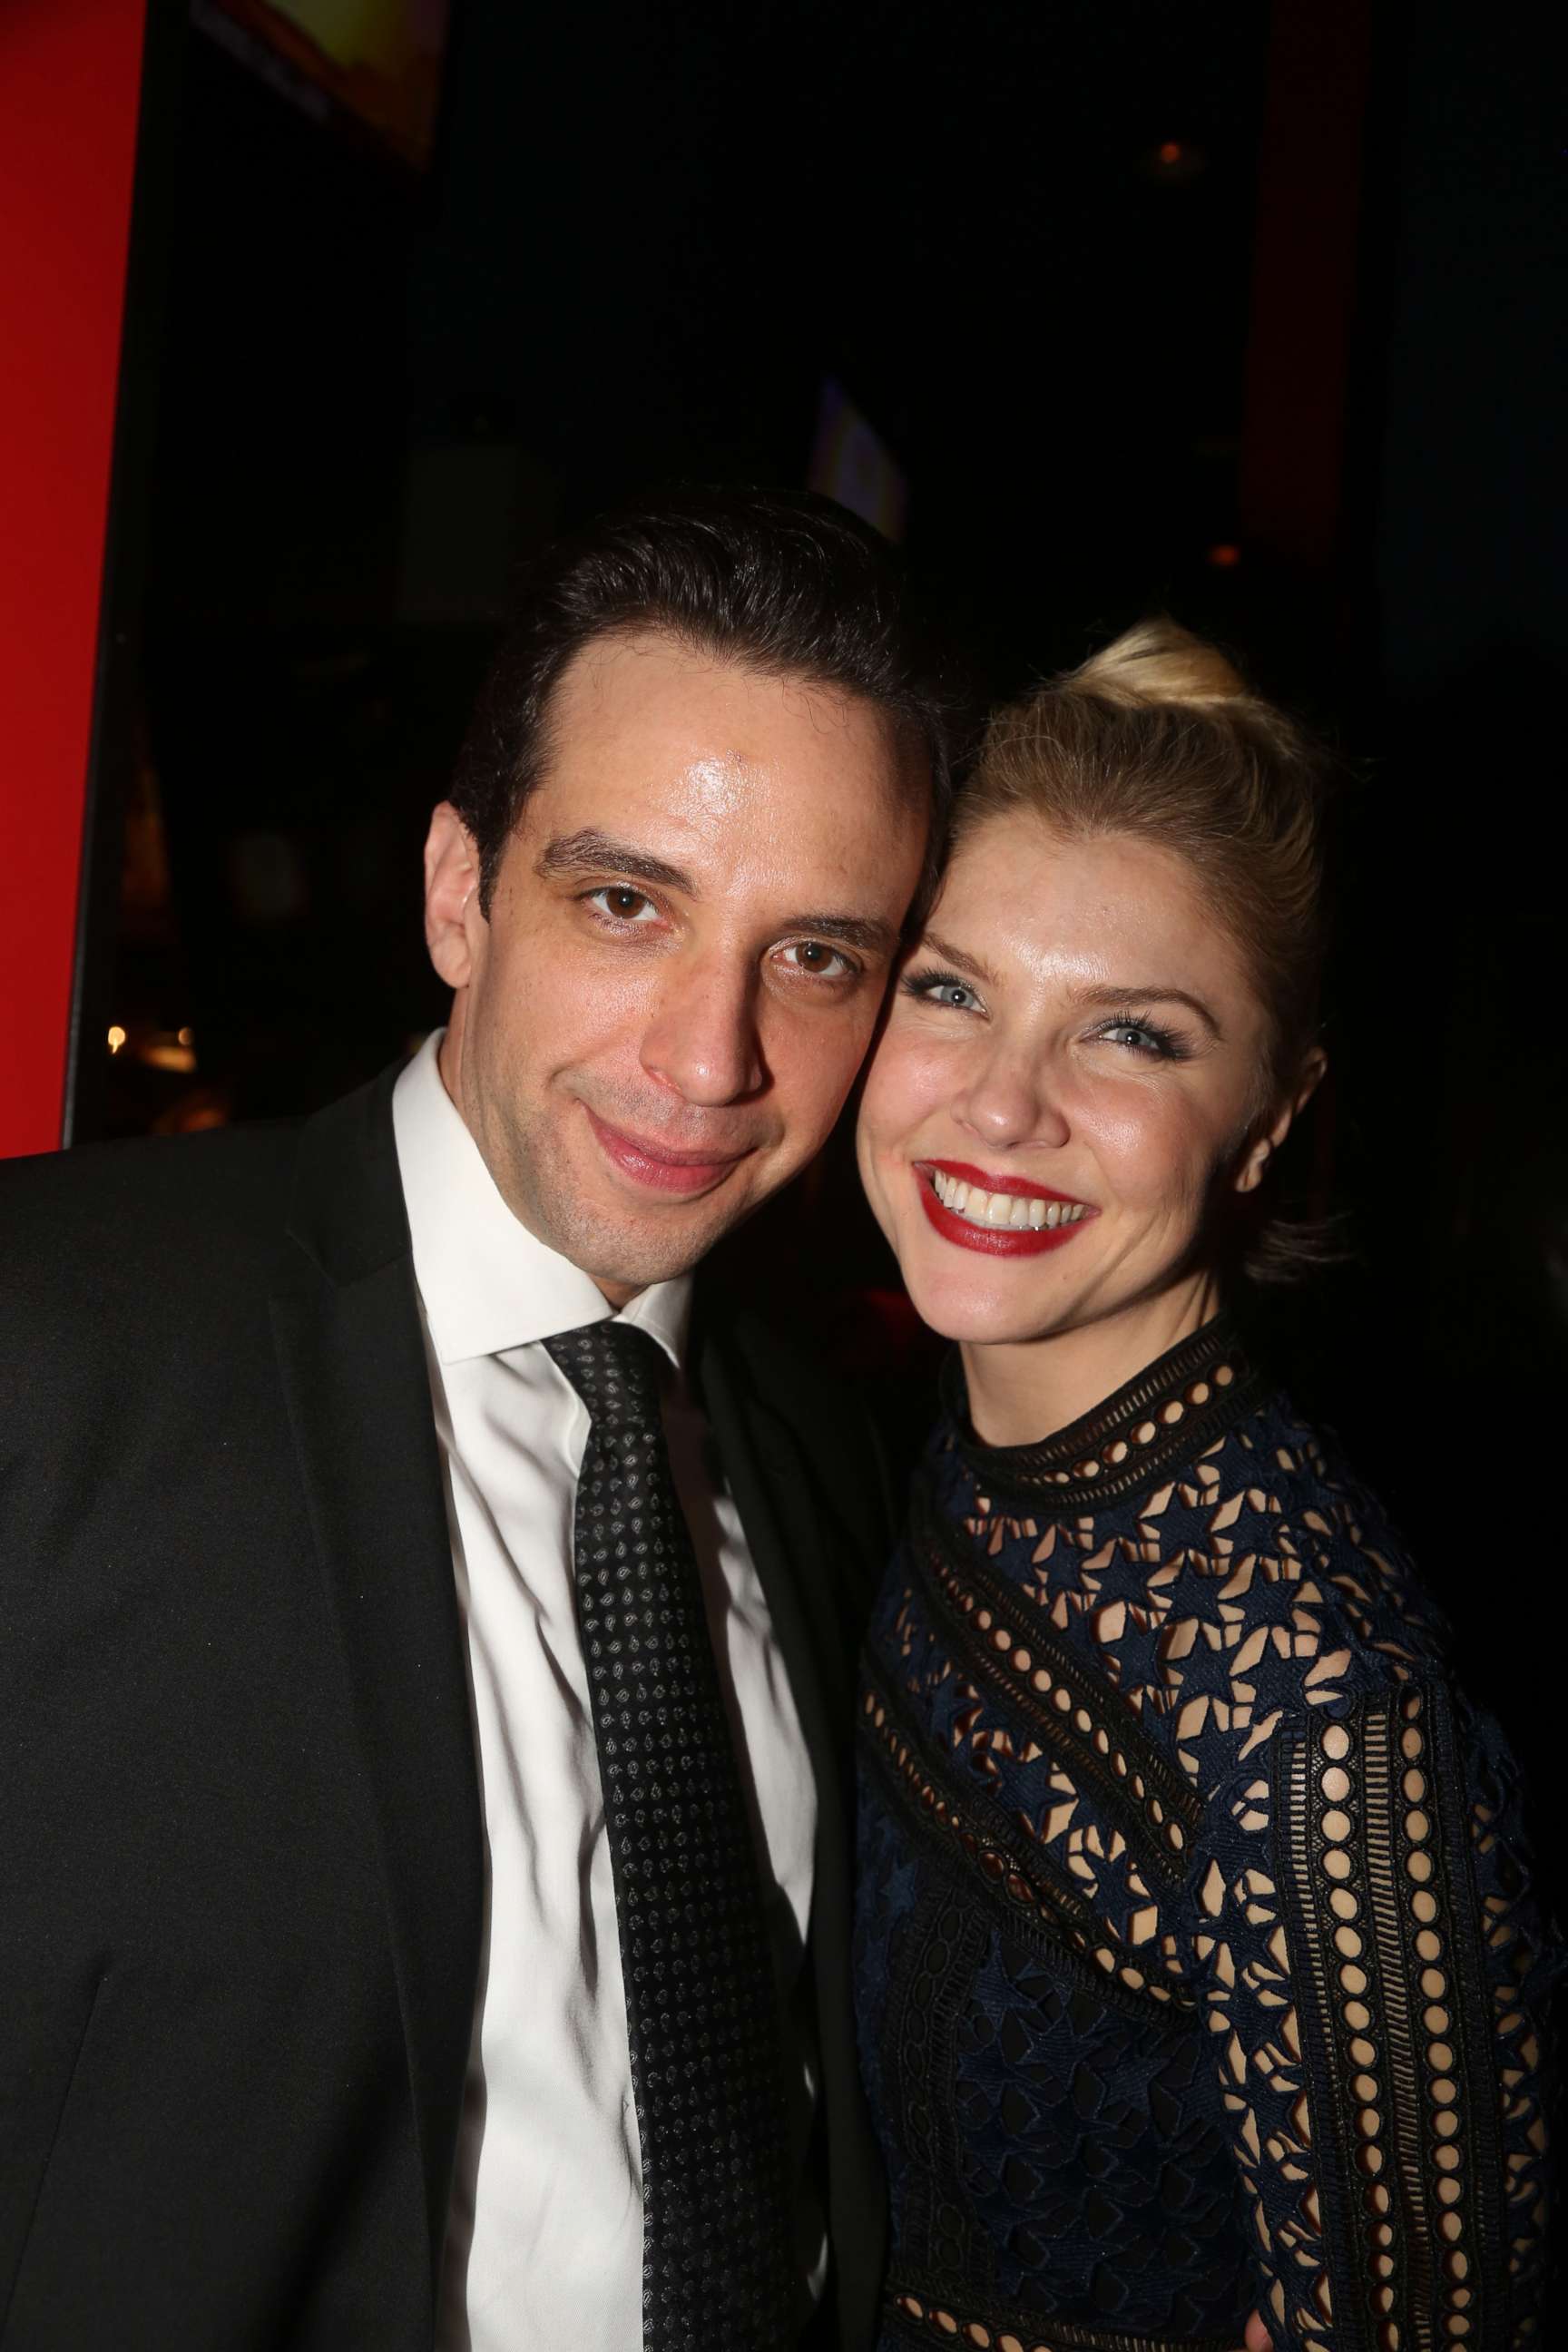 PHOTO: Nick Cordero and Amanda Kloots attend an event in New York, Feb. 19, 2017.